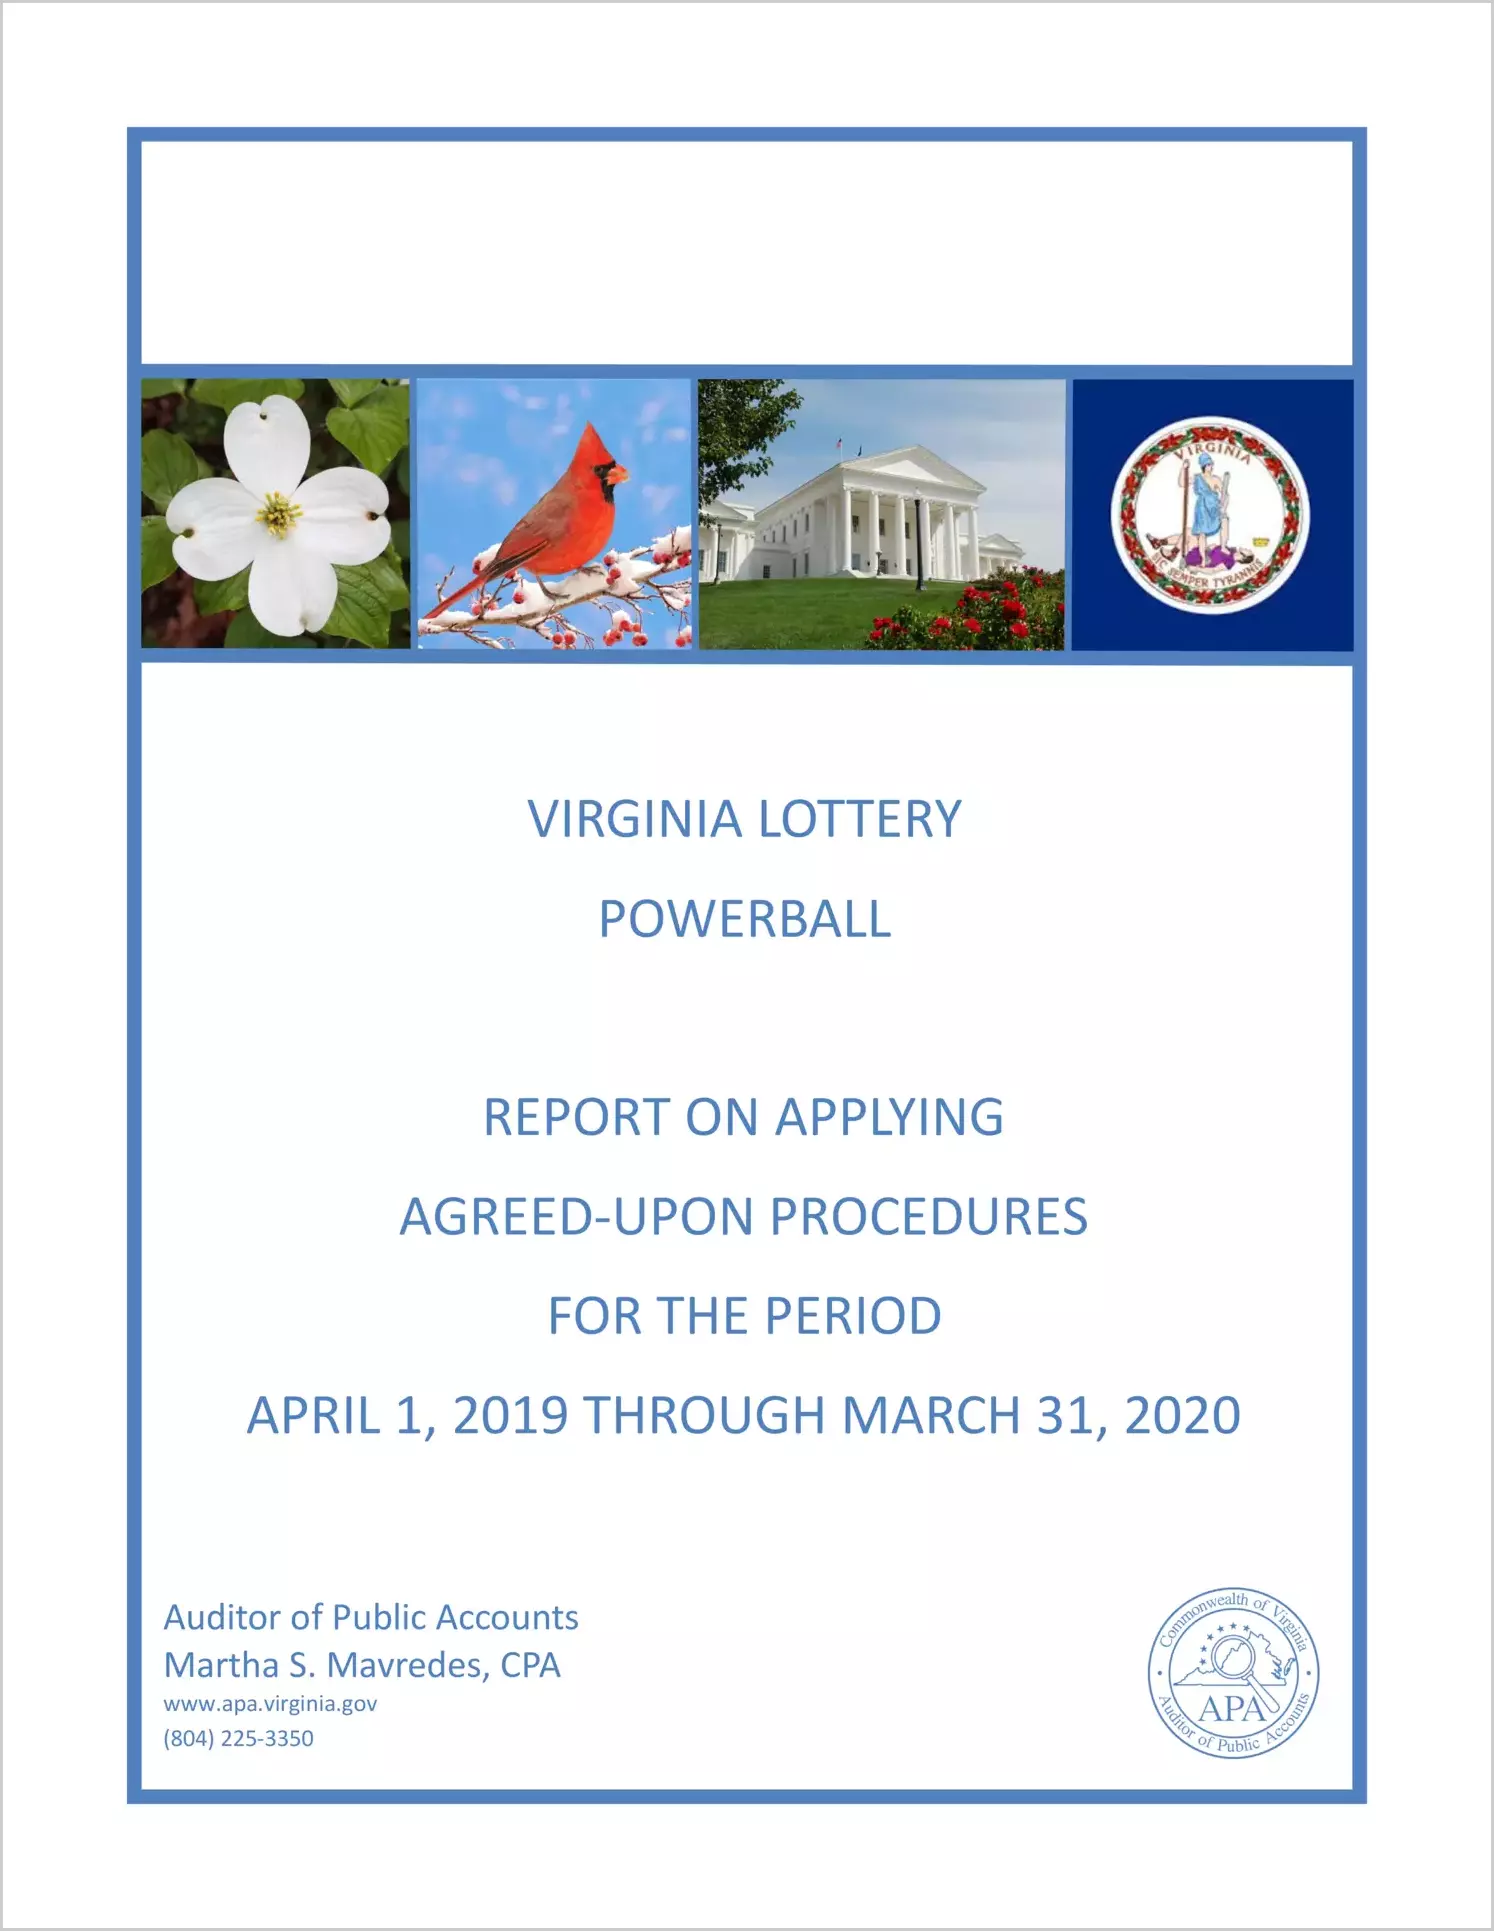 Viginia Lottery Powerball report on Applying Agreed Upon Procedures for the period April 1, 2019 through March 31, 2020